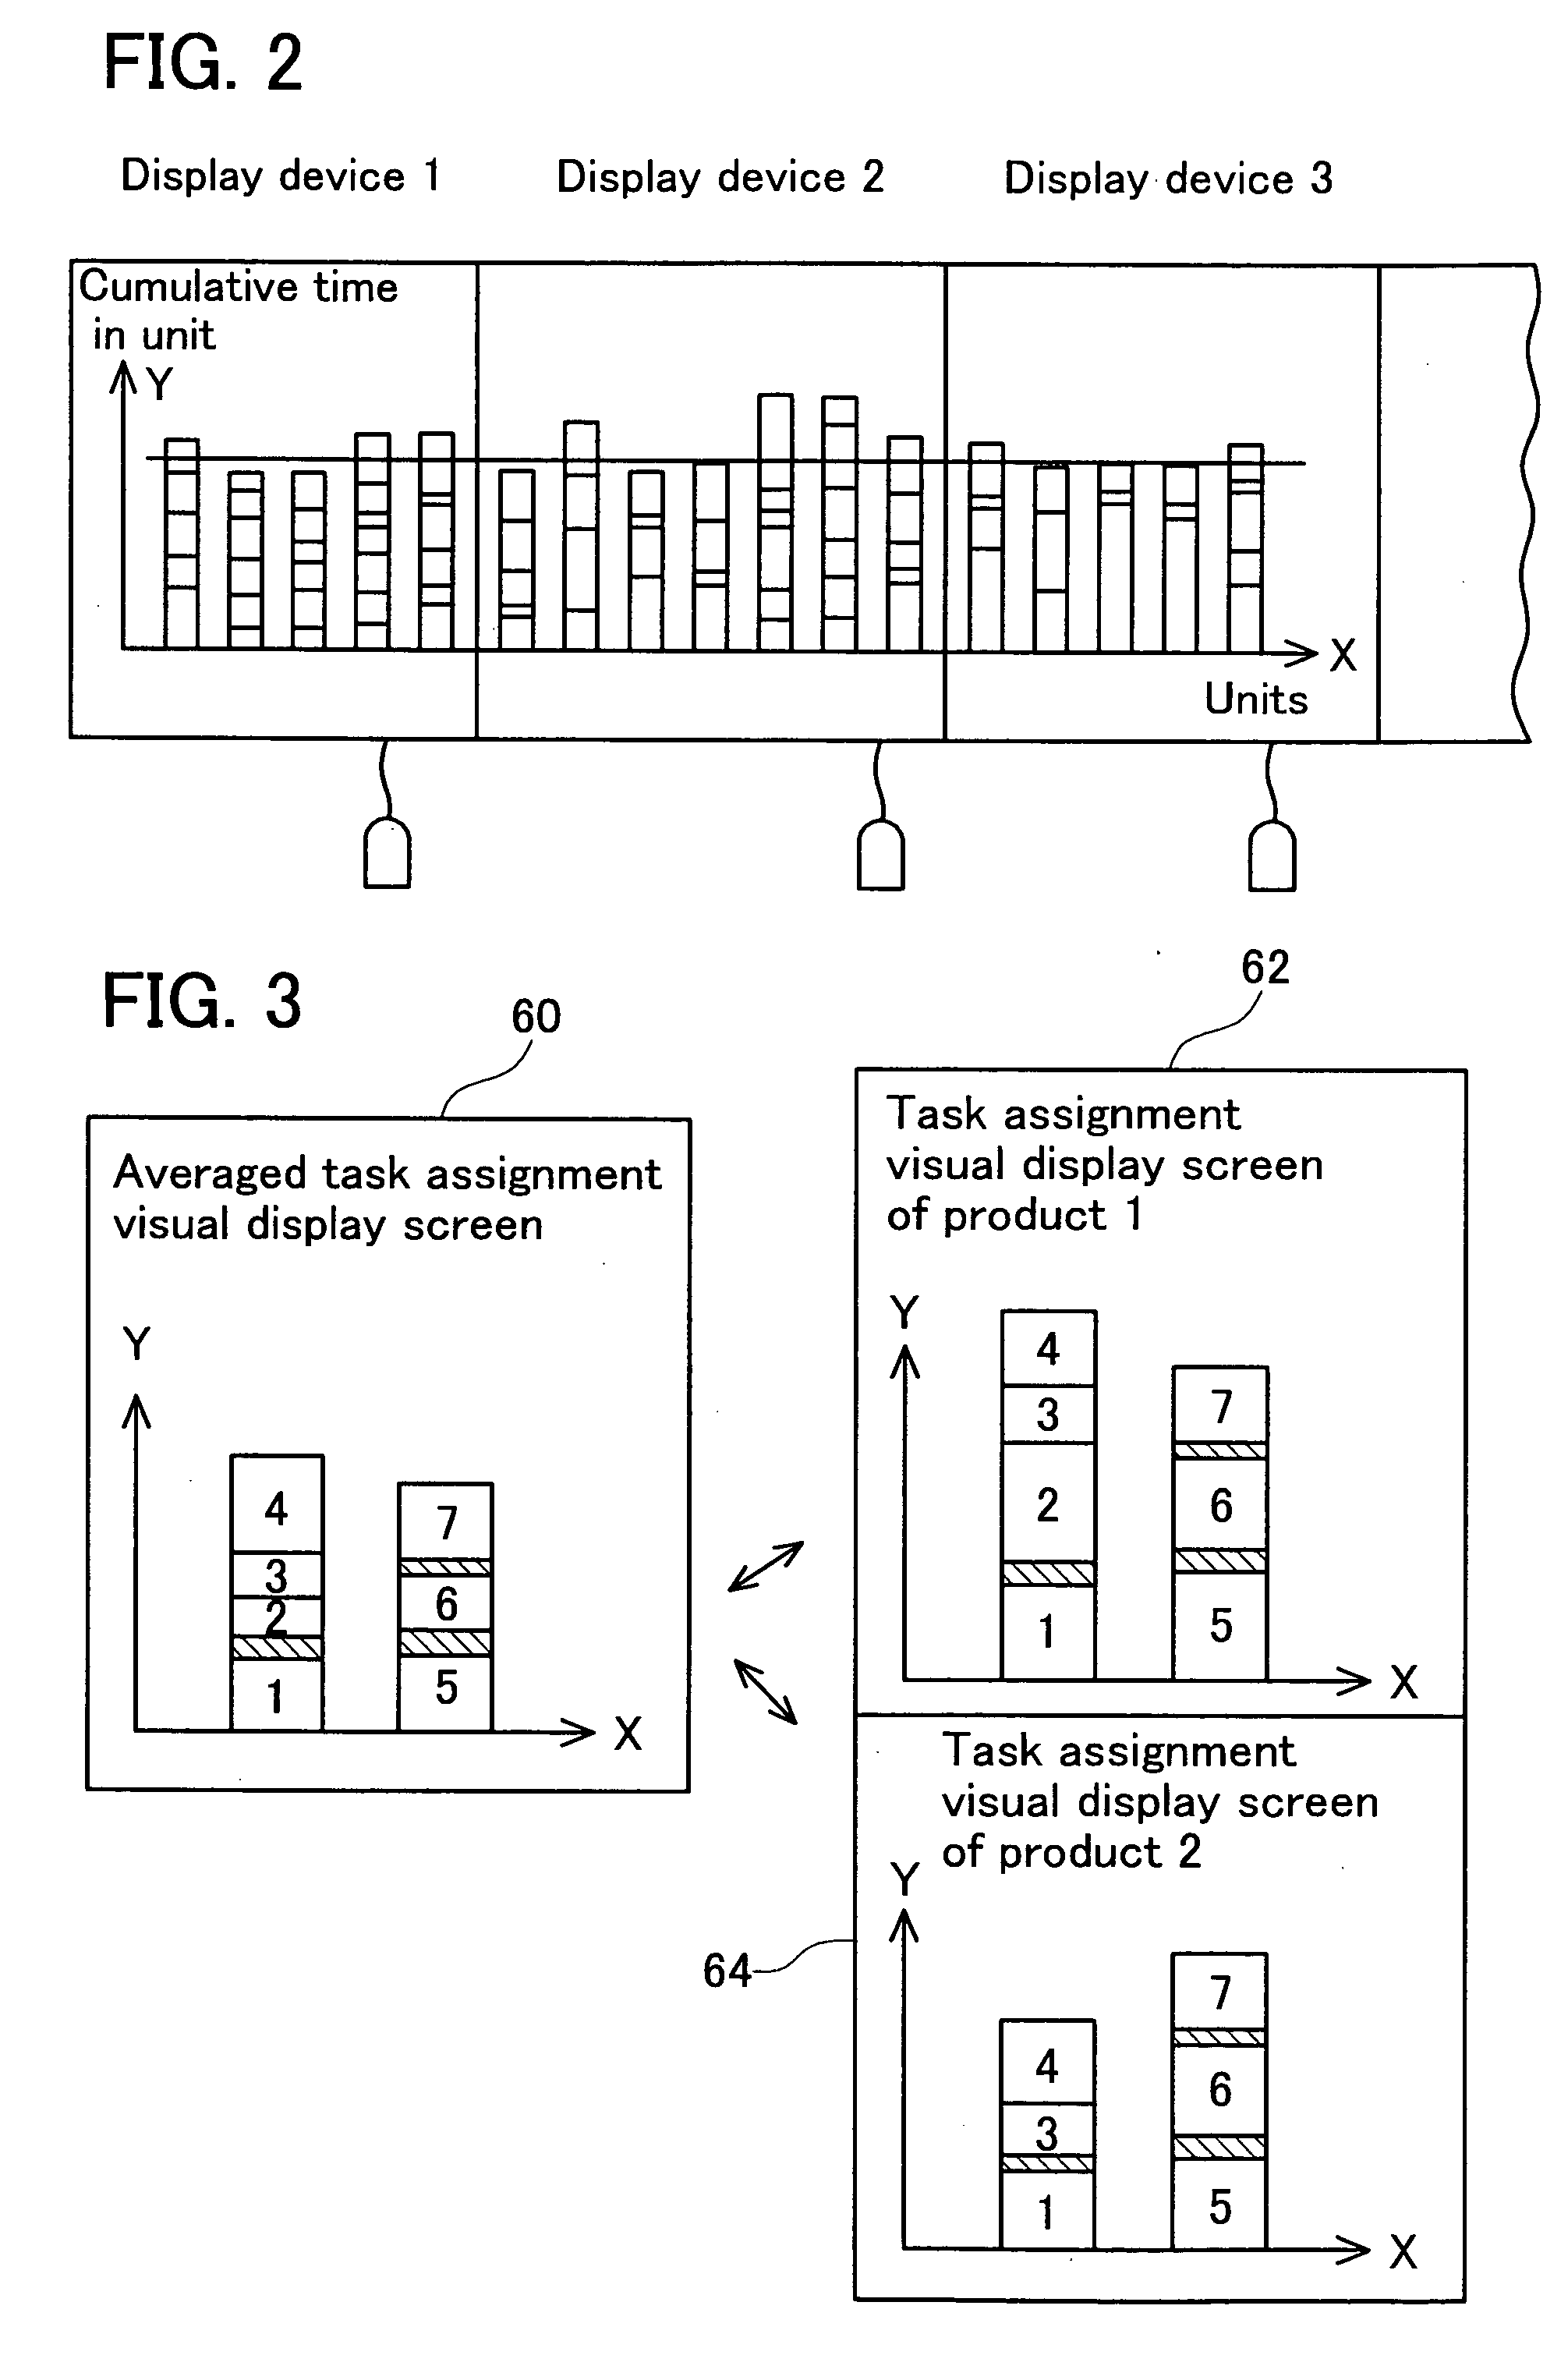 System for assisting planning of work allocation utilizing visual display screen